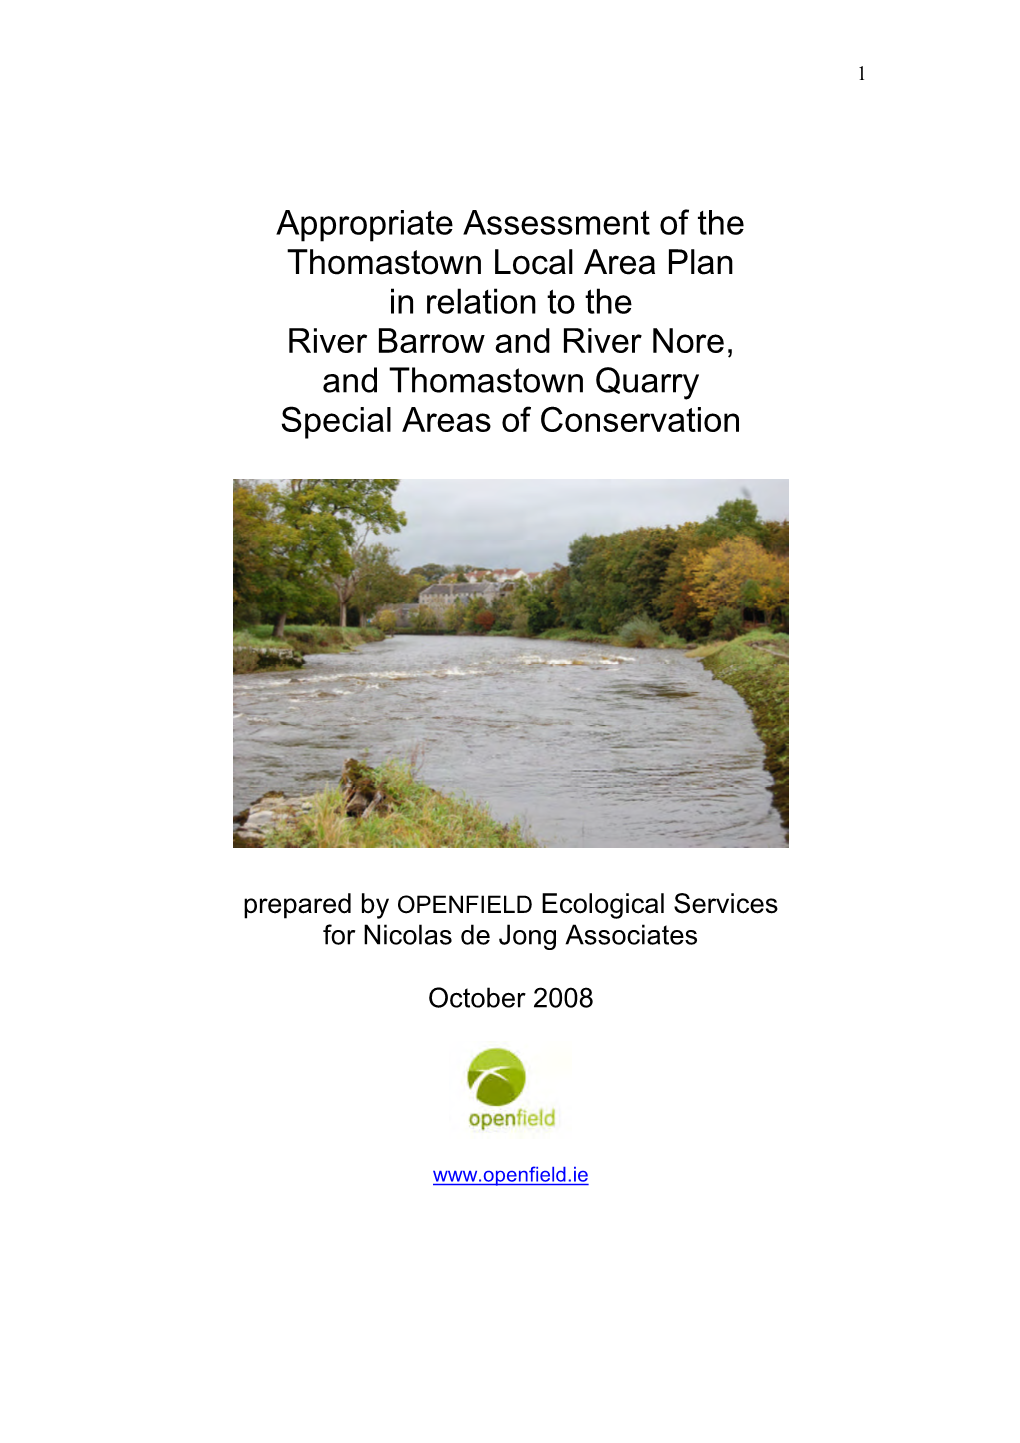 Appropriate Assessment of the Thomastown Local Area Plan in Relation to the River Barrow and River Nore, and Thomastown Quarry Special Areas of Conservation